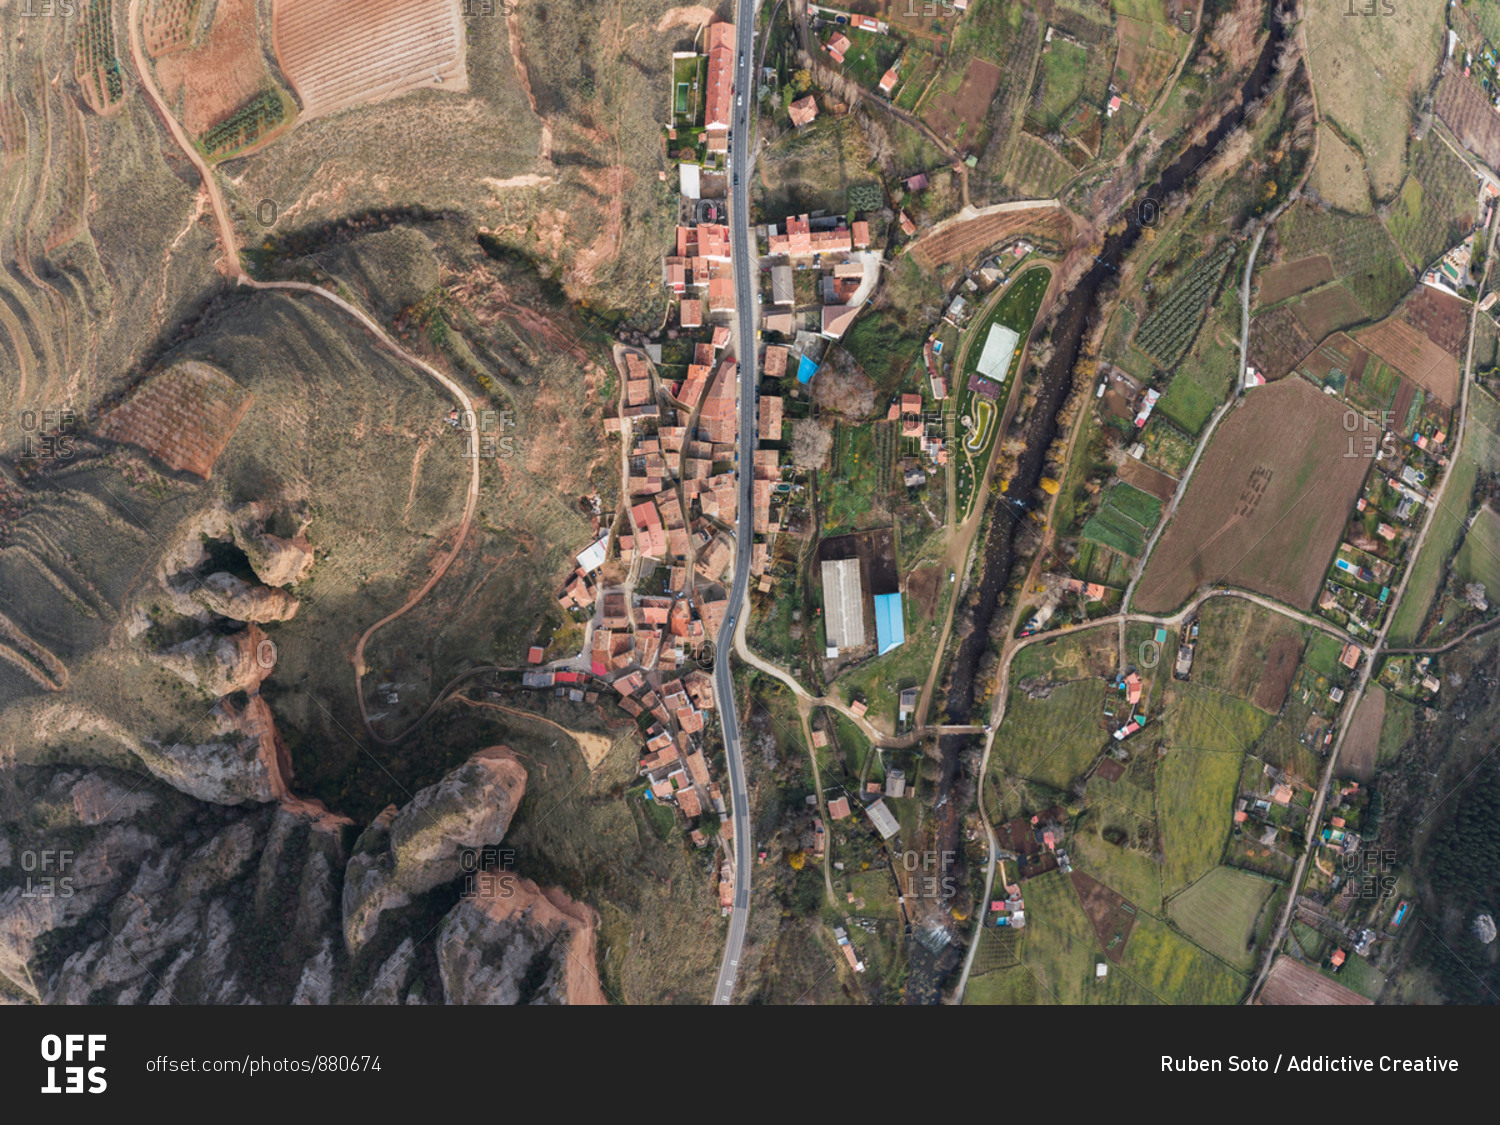 Drone view of rural town and road, in the village of Islallana, La Rioja, Spain